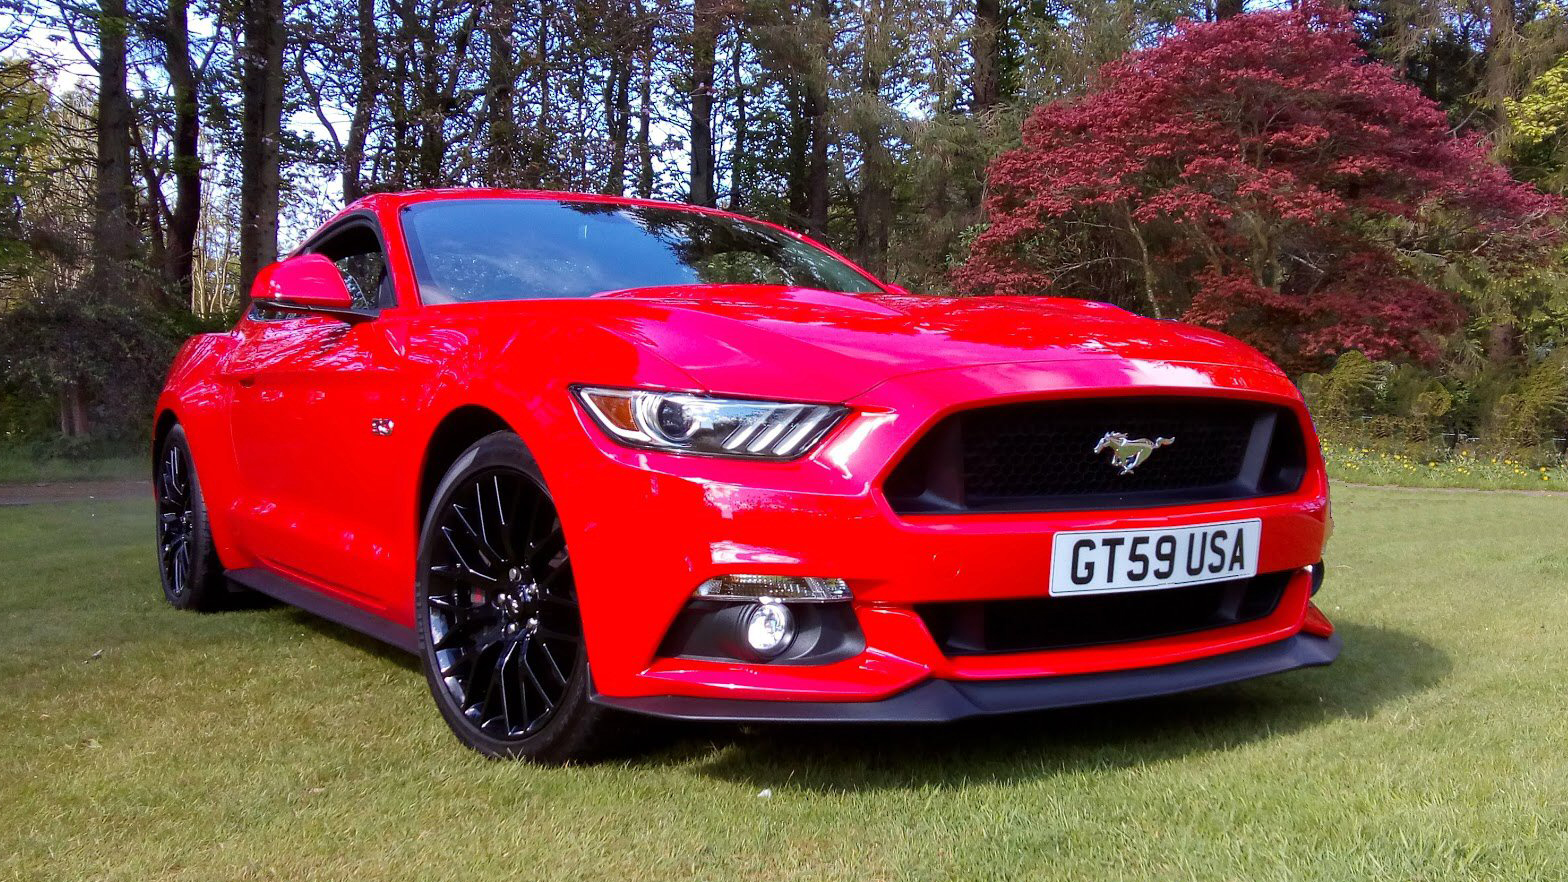 Modern red Mustang with balck wheels parked in a park with colourful flowers in the background.